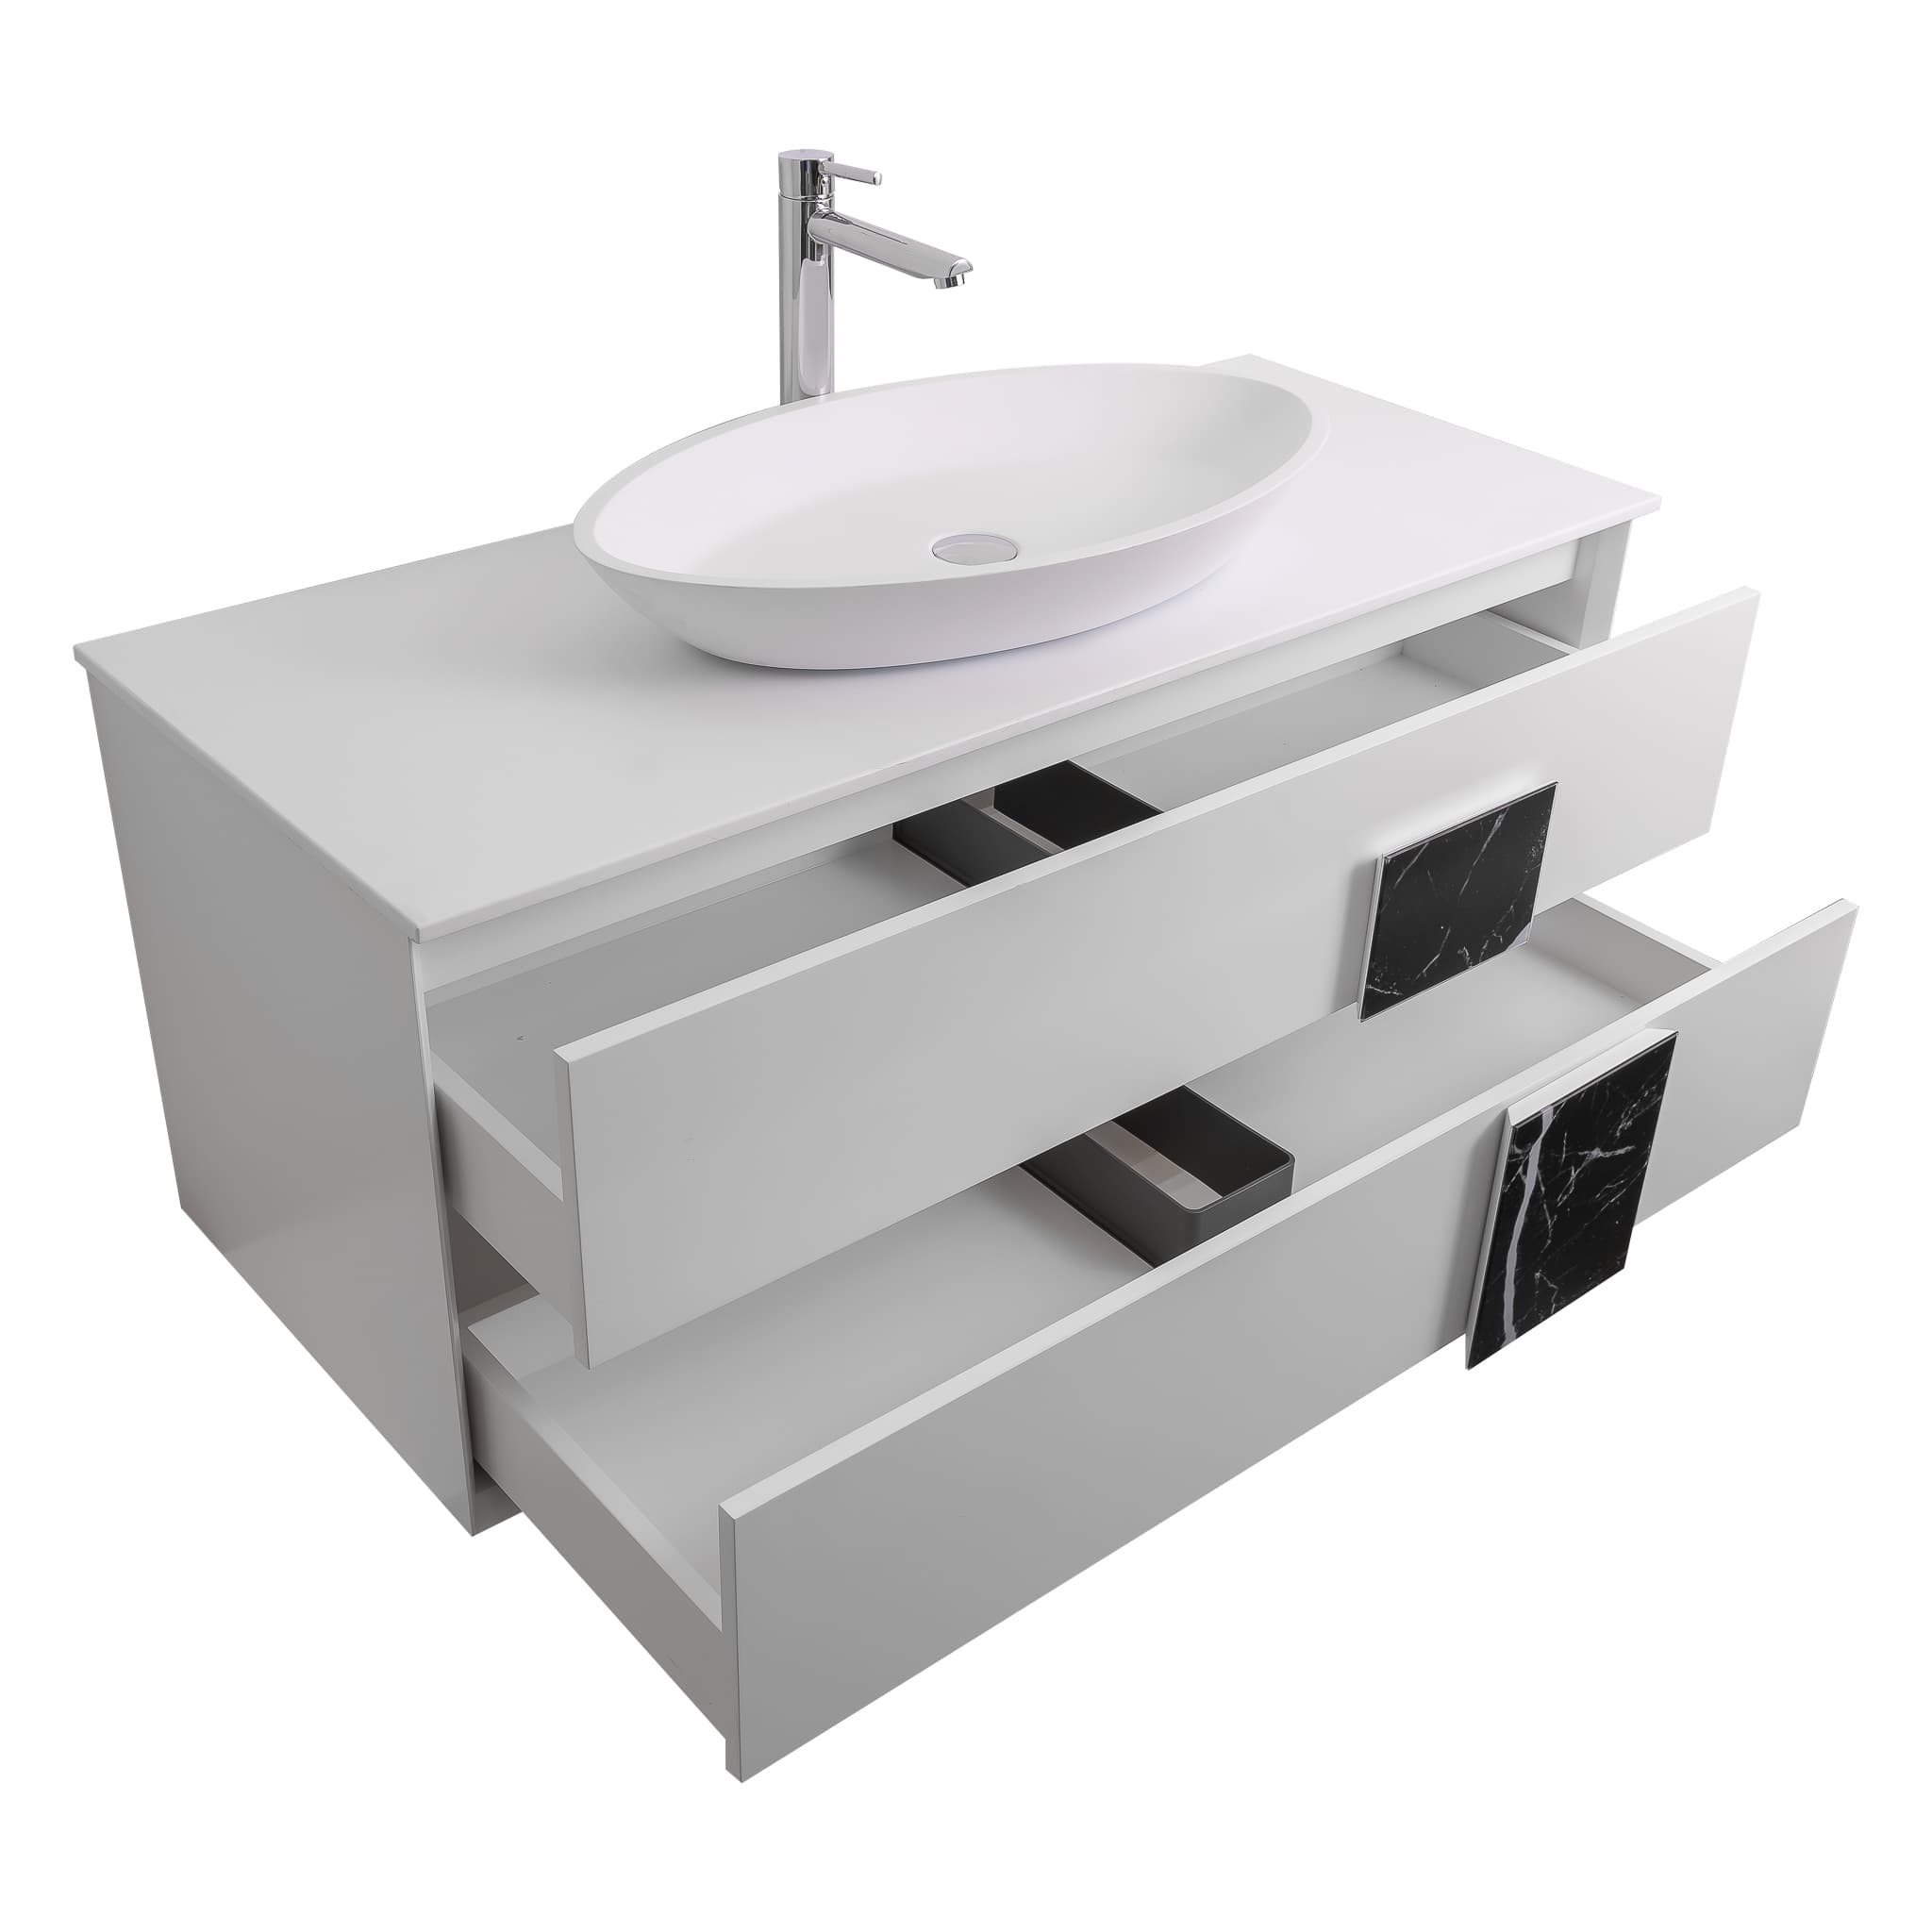 Piazza 47.5 Matte White With Black Marble Handle Cabinet, Solid Surface Flat White Counter and Oval Solid Surface White Basin 1305, Wall Mounted Modern Vanity Set